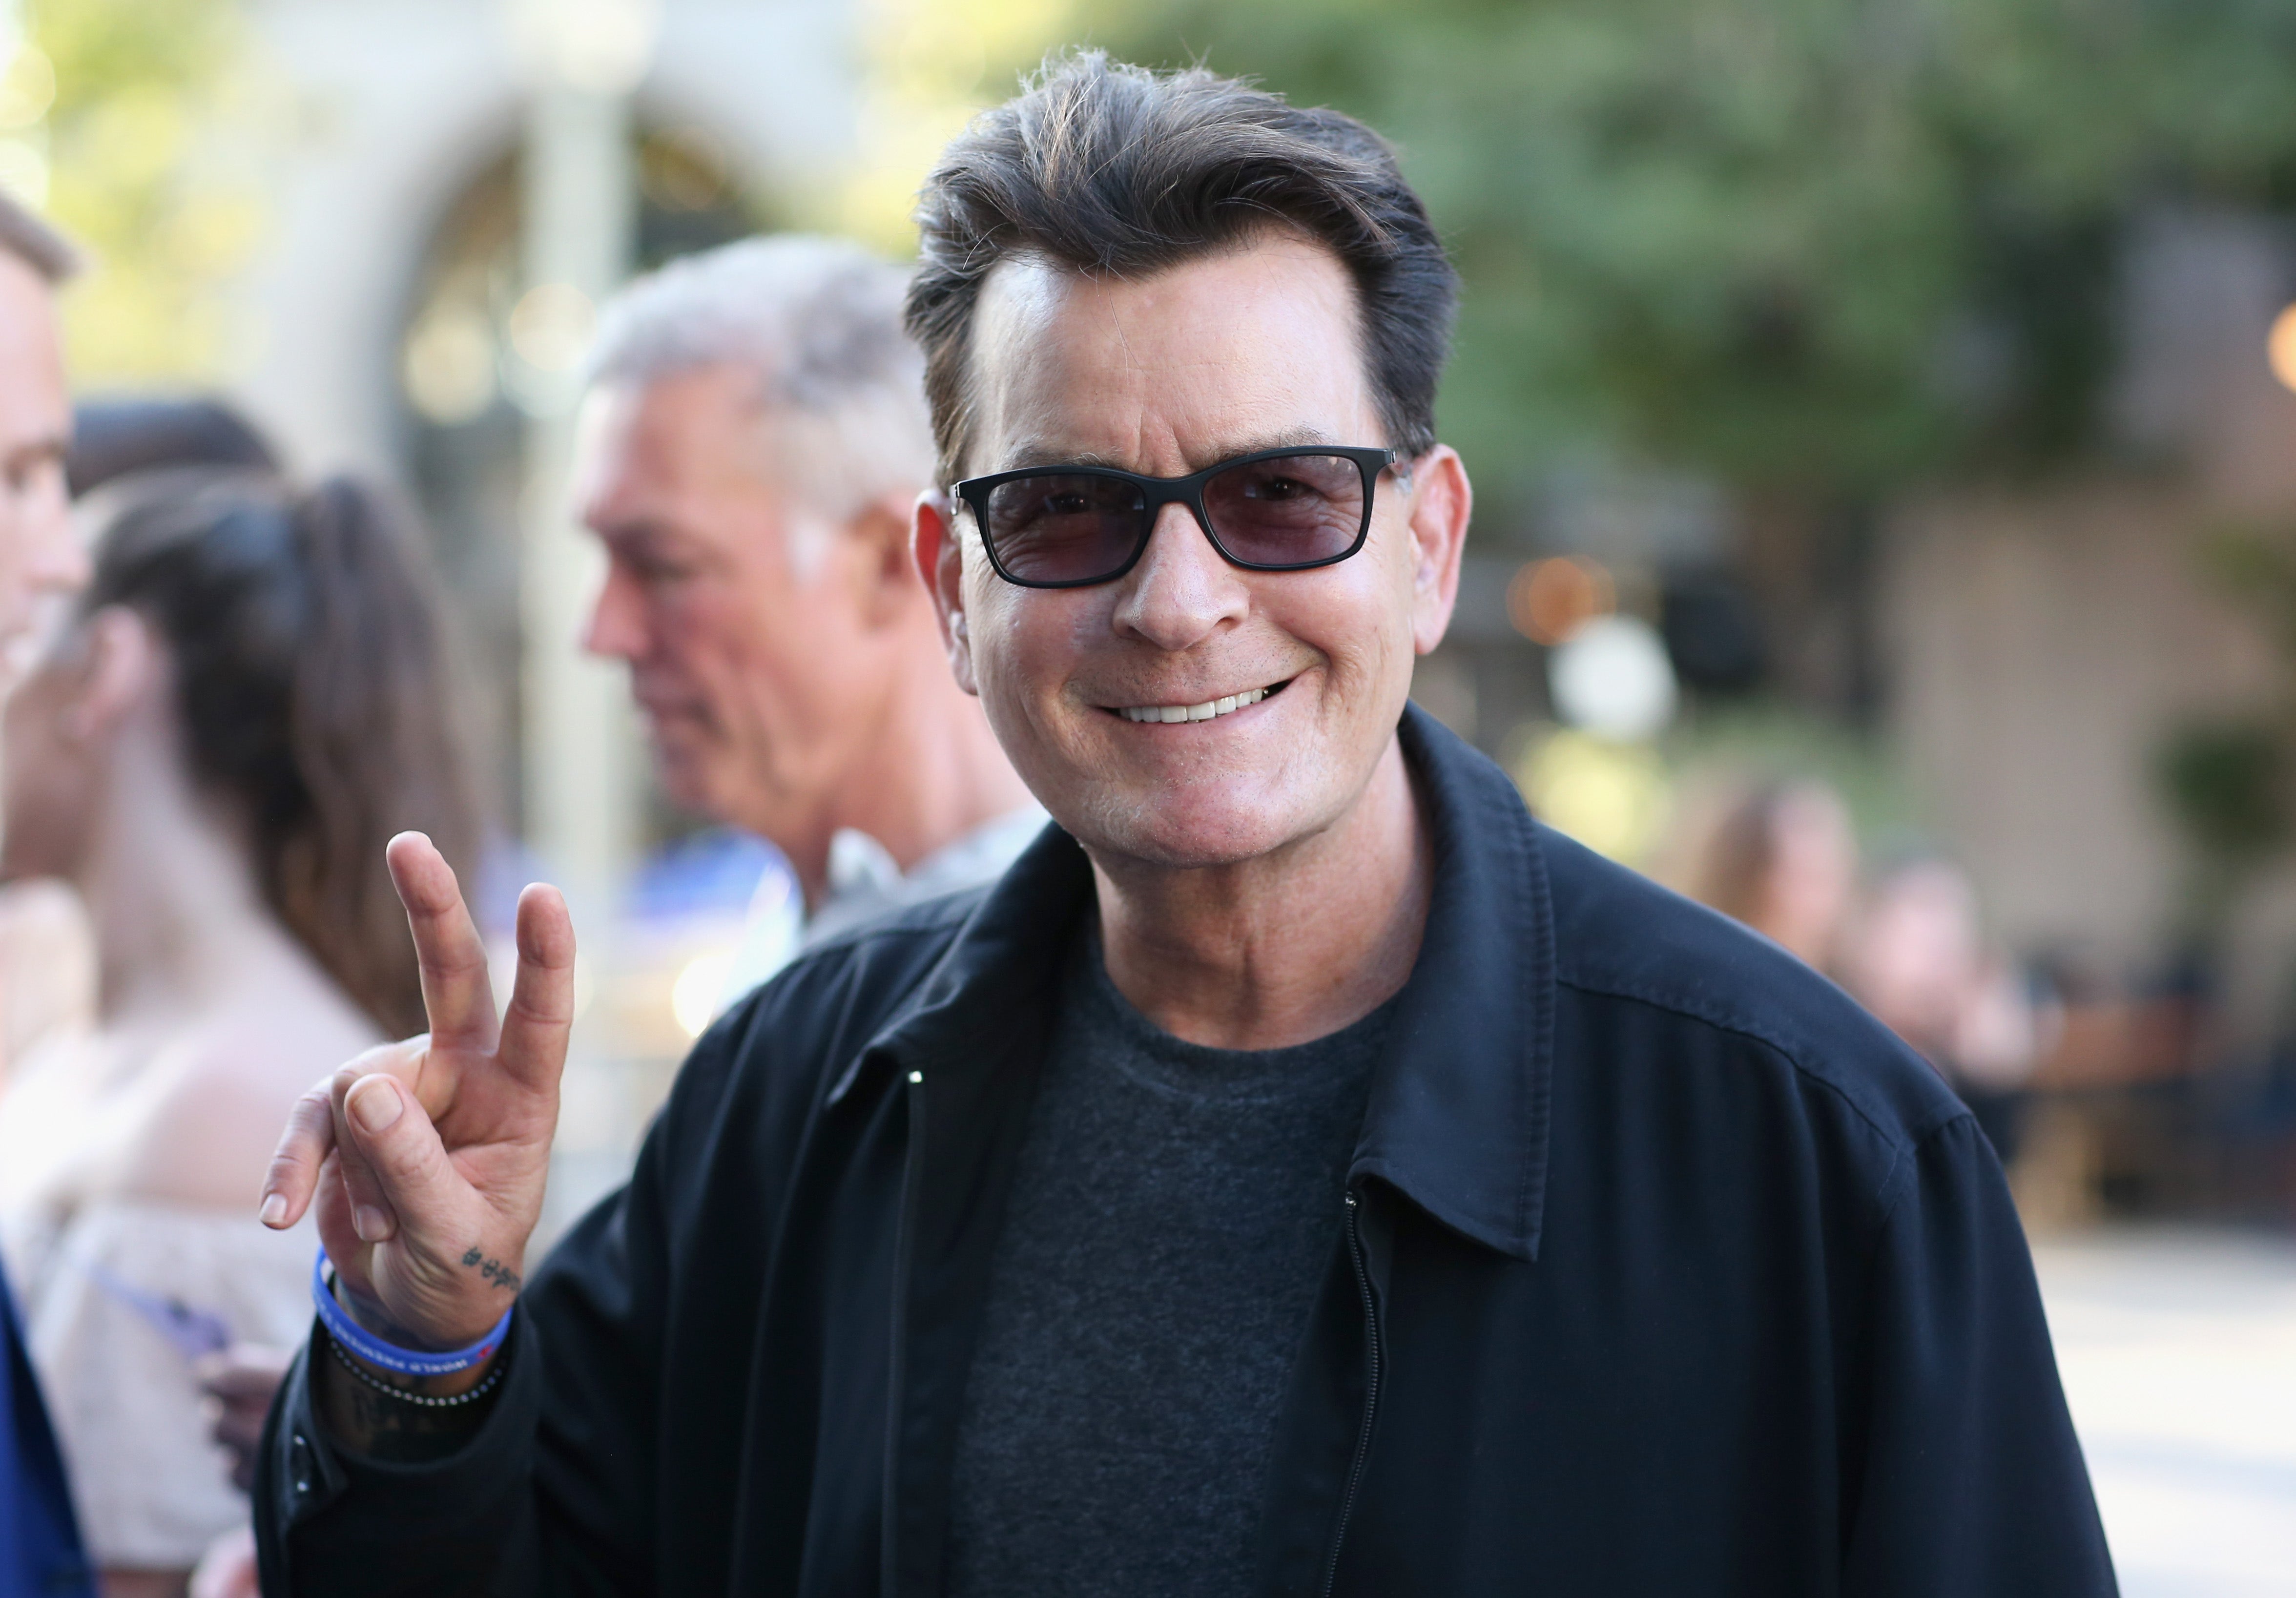 Charlie Sheen's TV comeback after 'tiger blood,' nasty feuds and HIV diagnosis